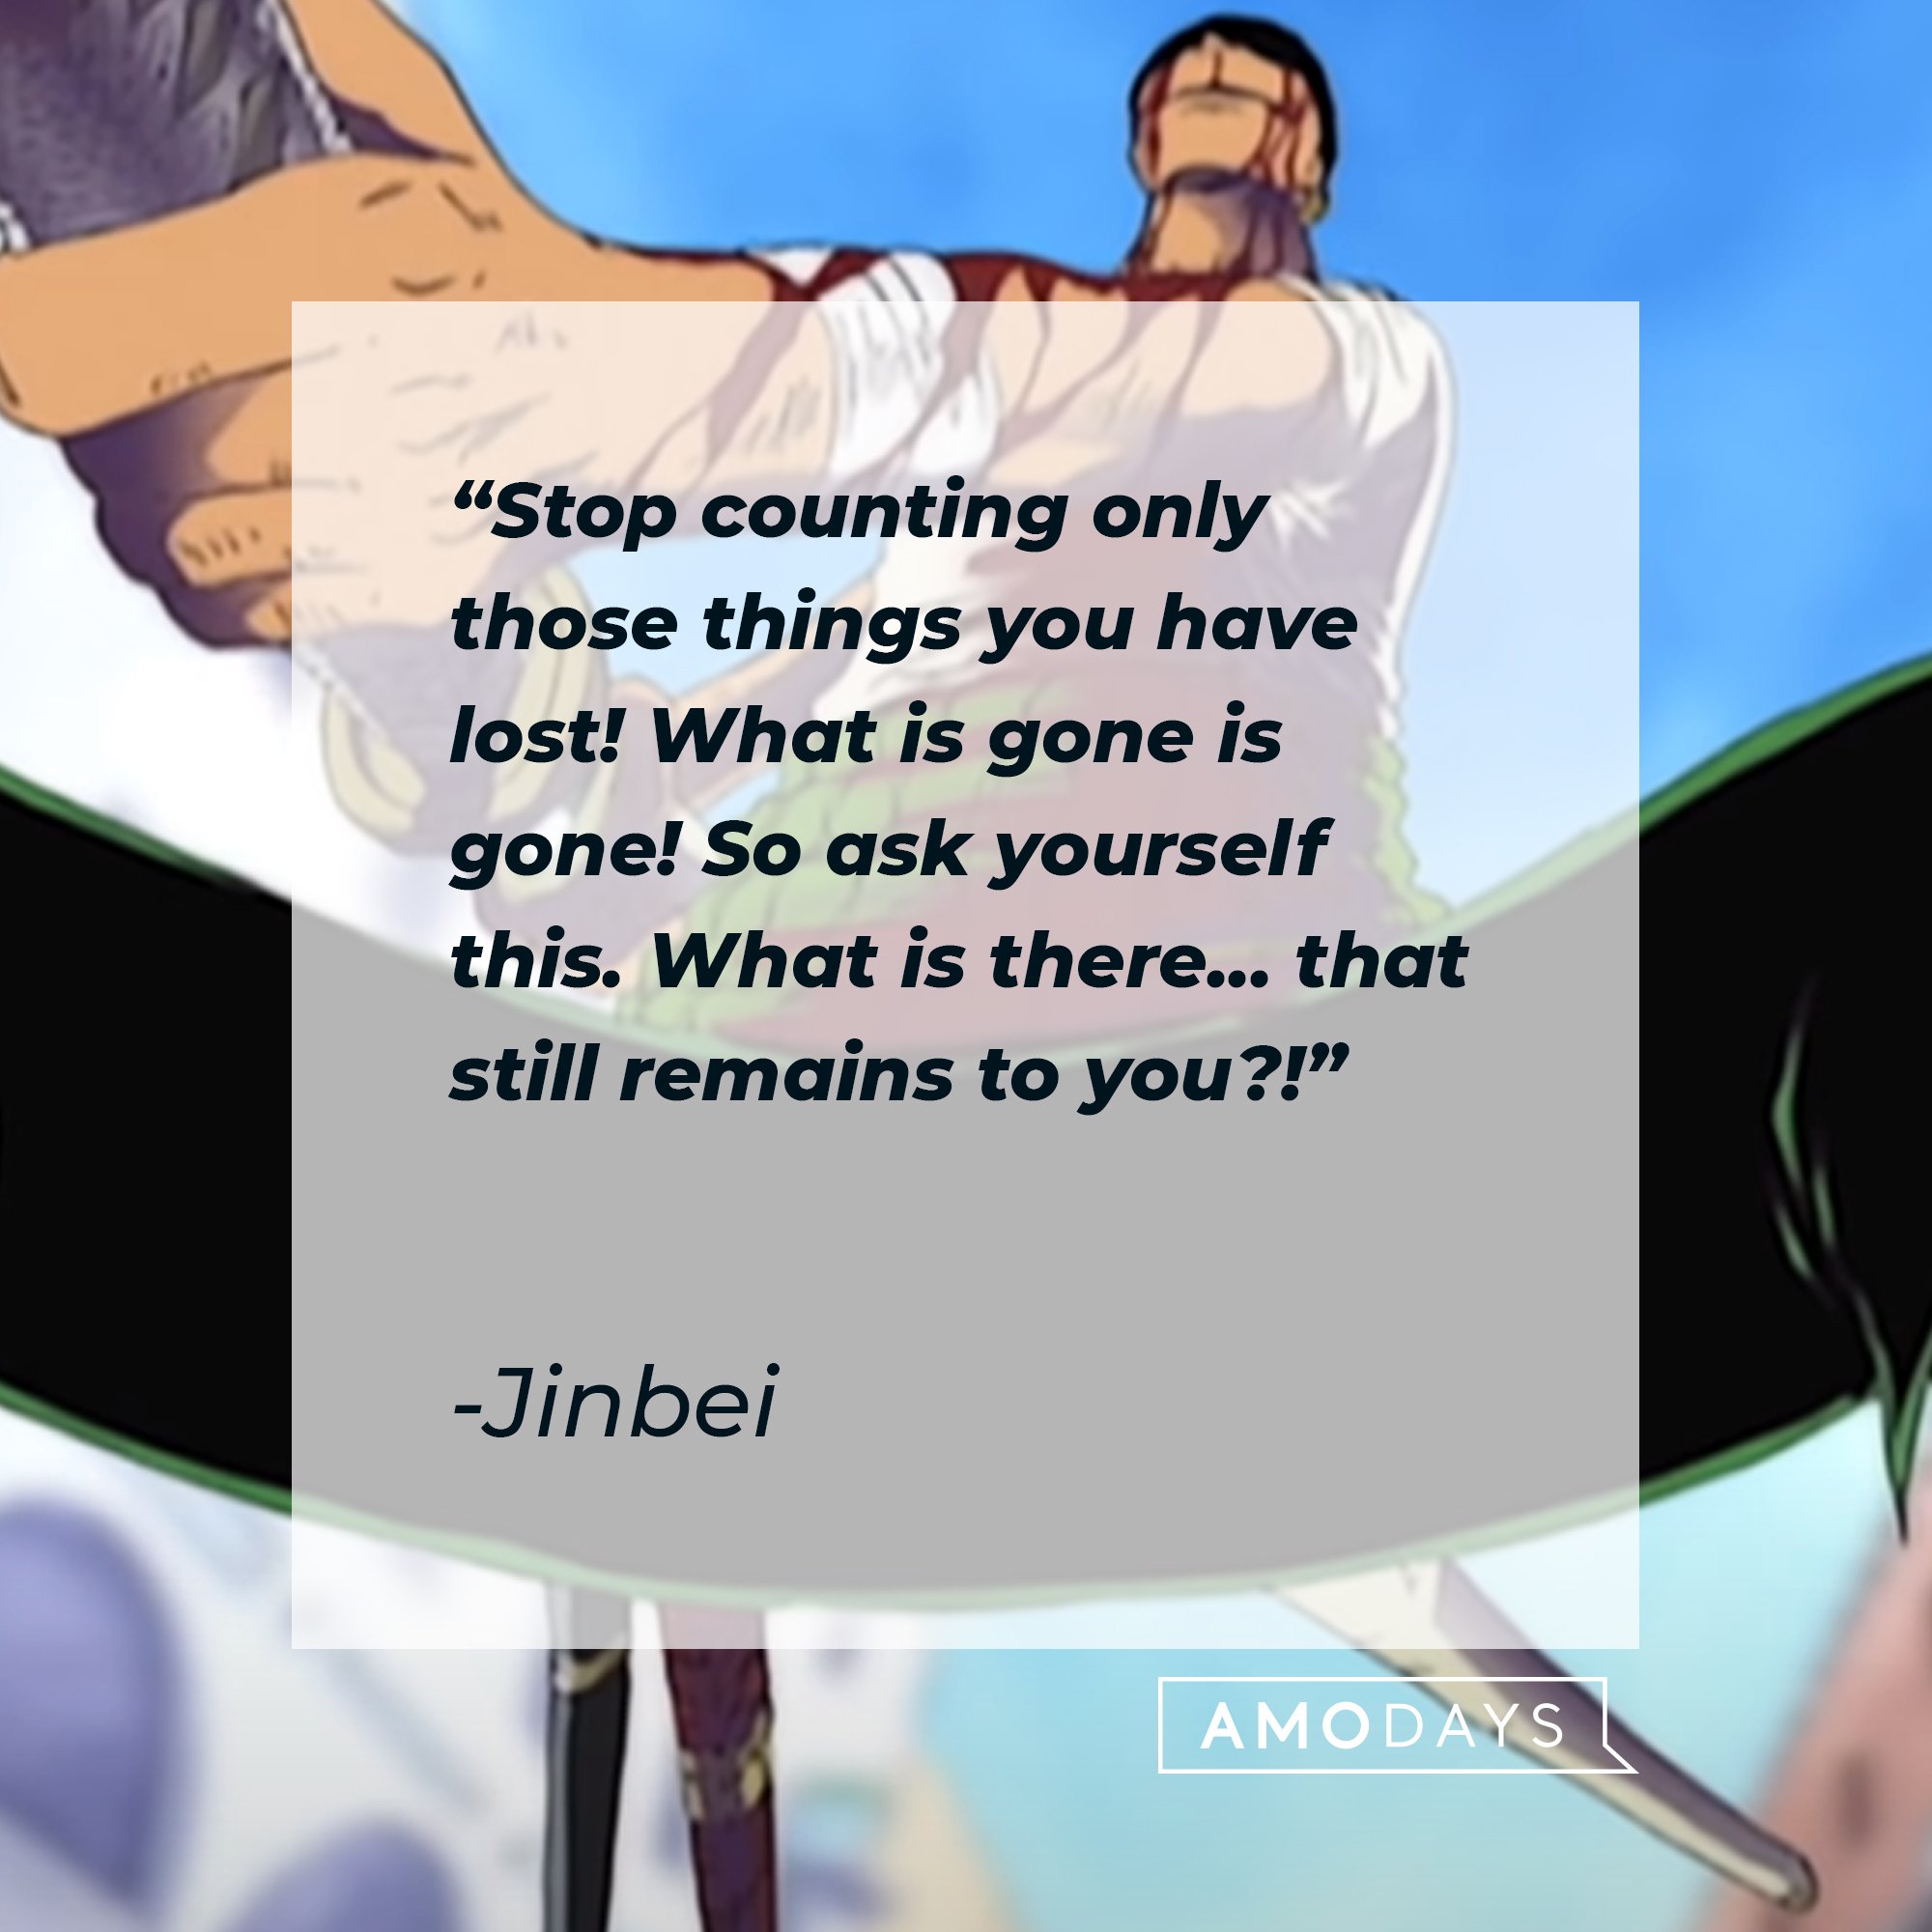  Jinbei's quote: "Stop counting only those things you have lost! What is gone is gone! So ask yourself this. What is there... that still remains to you?!"  | Image: AmoDays